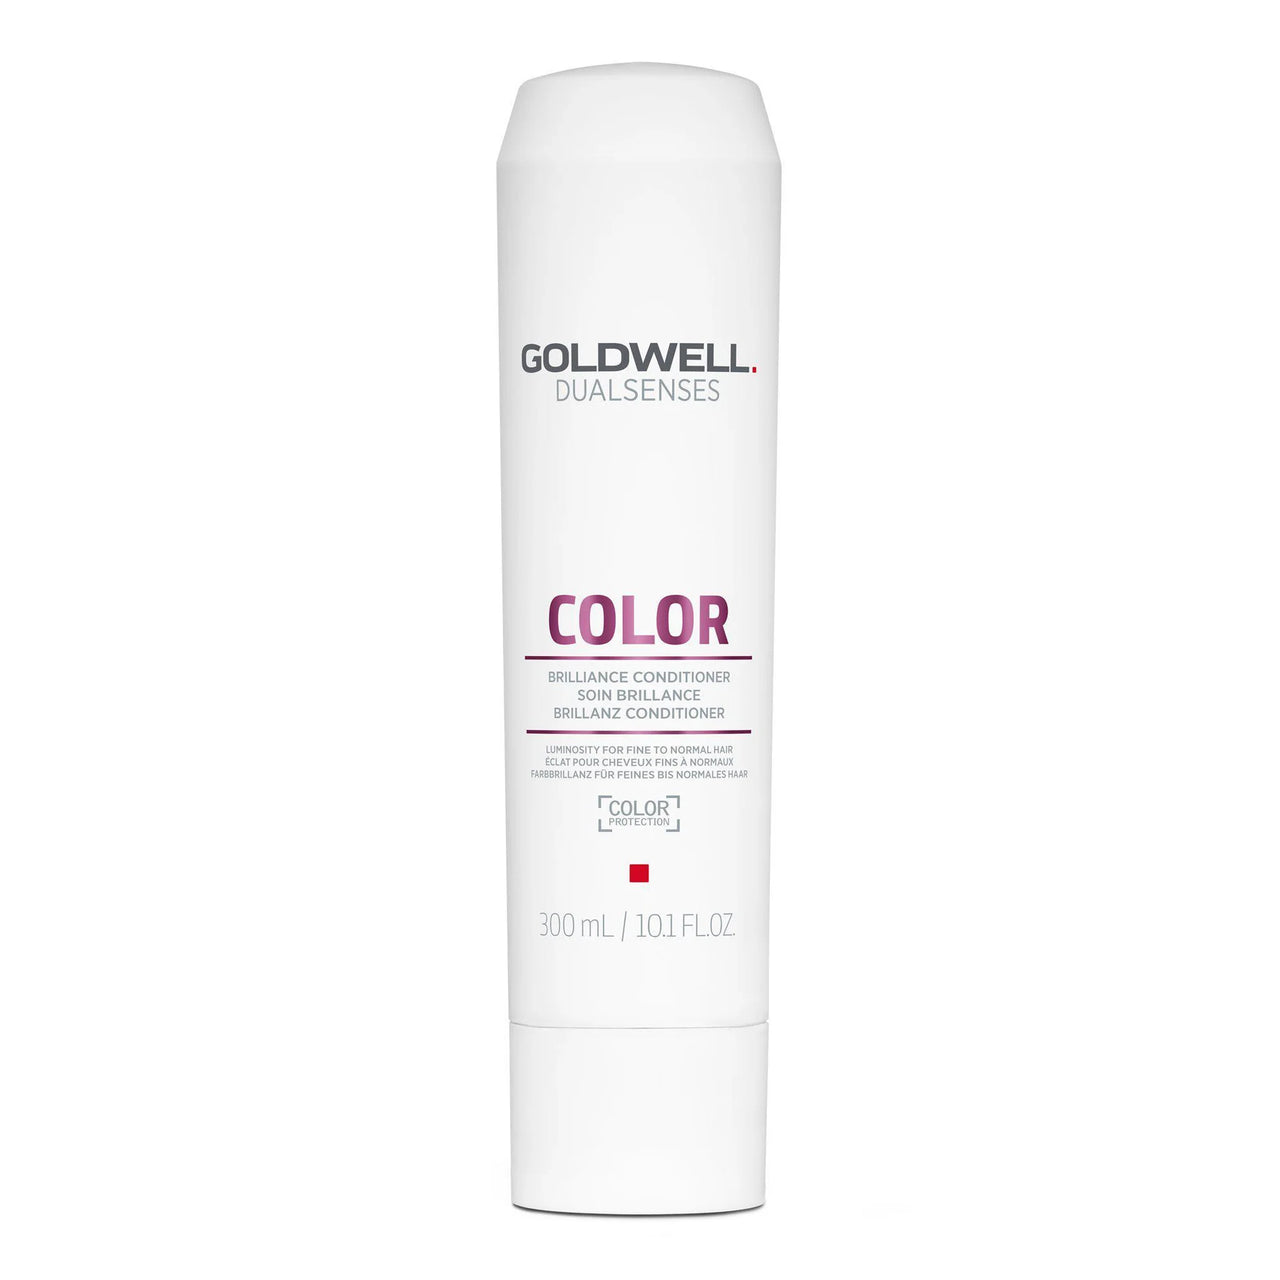 Goldwell Dualsenses Color Brilliance Conditioner Color Protection Luminosity for Fine to Normal Hair 300ml